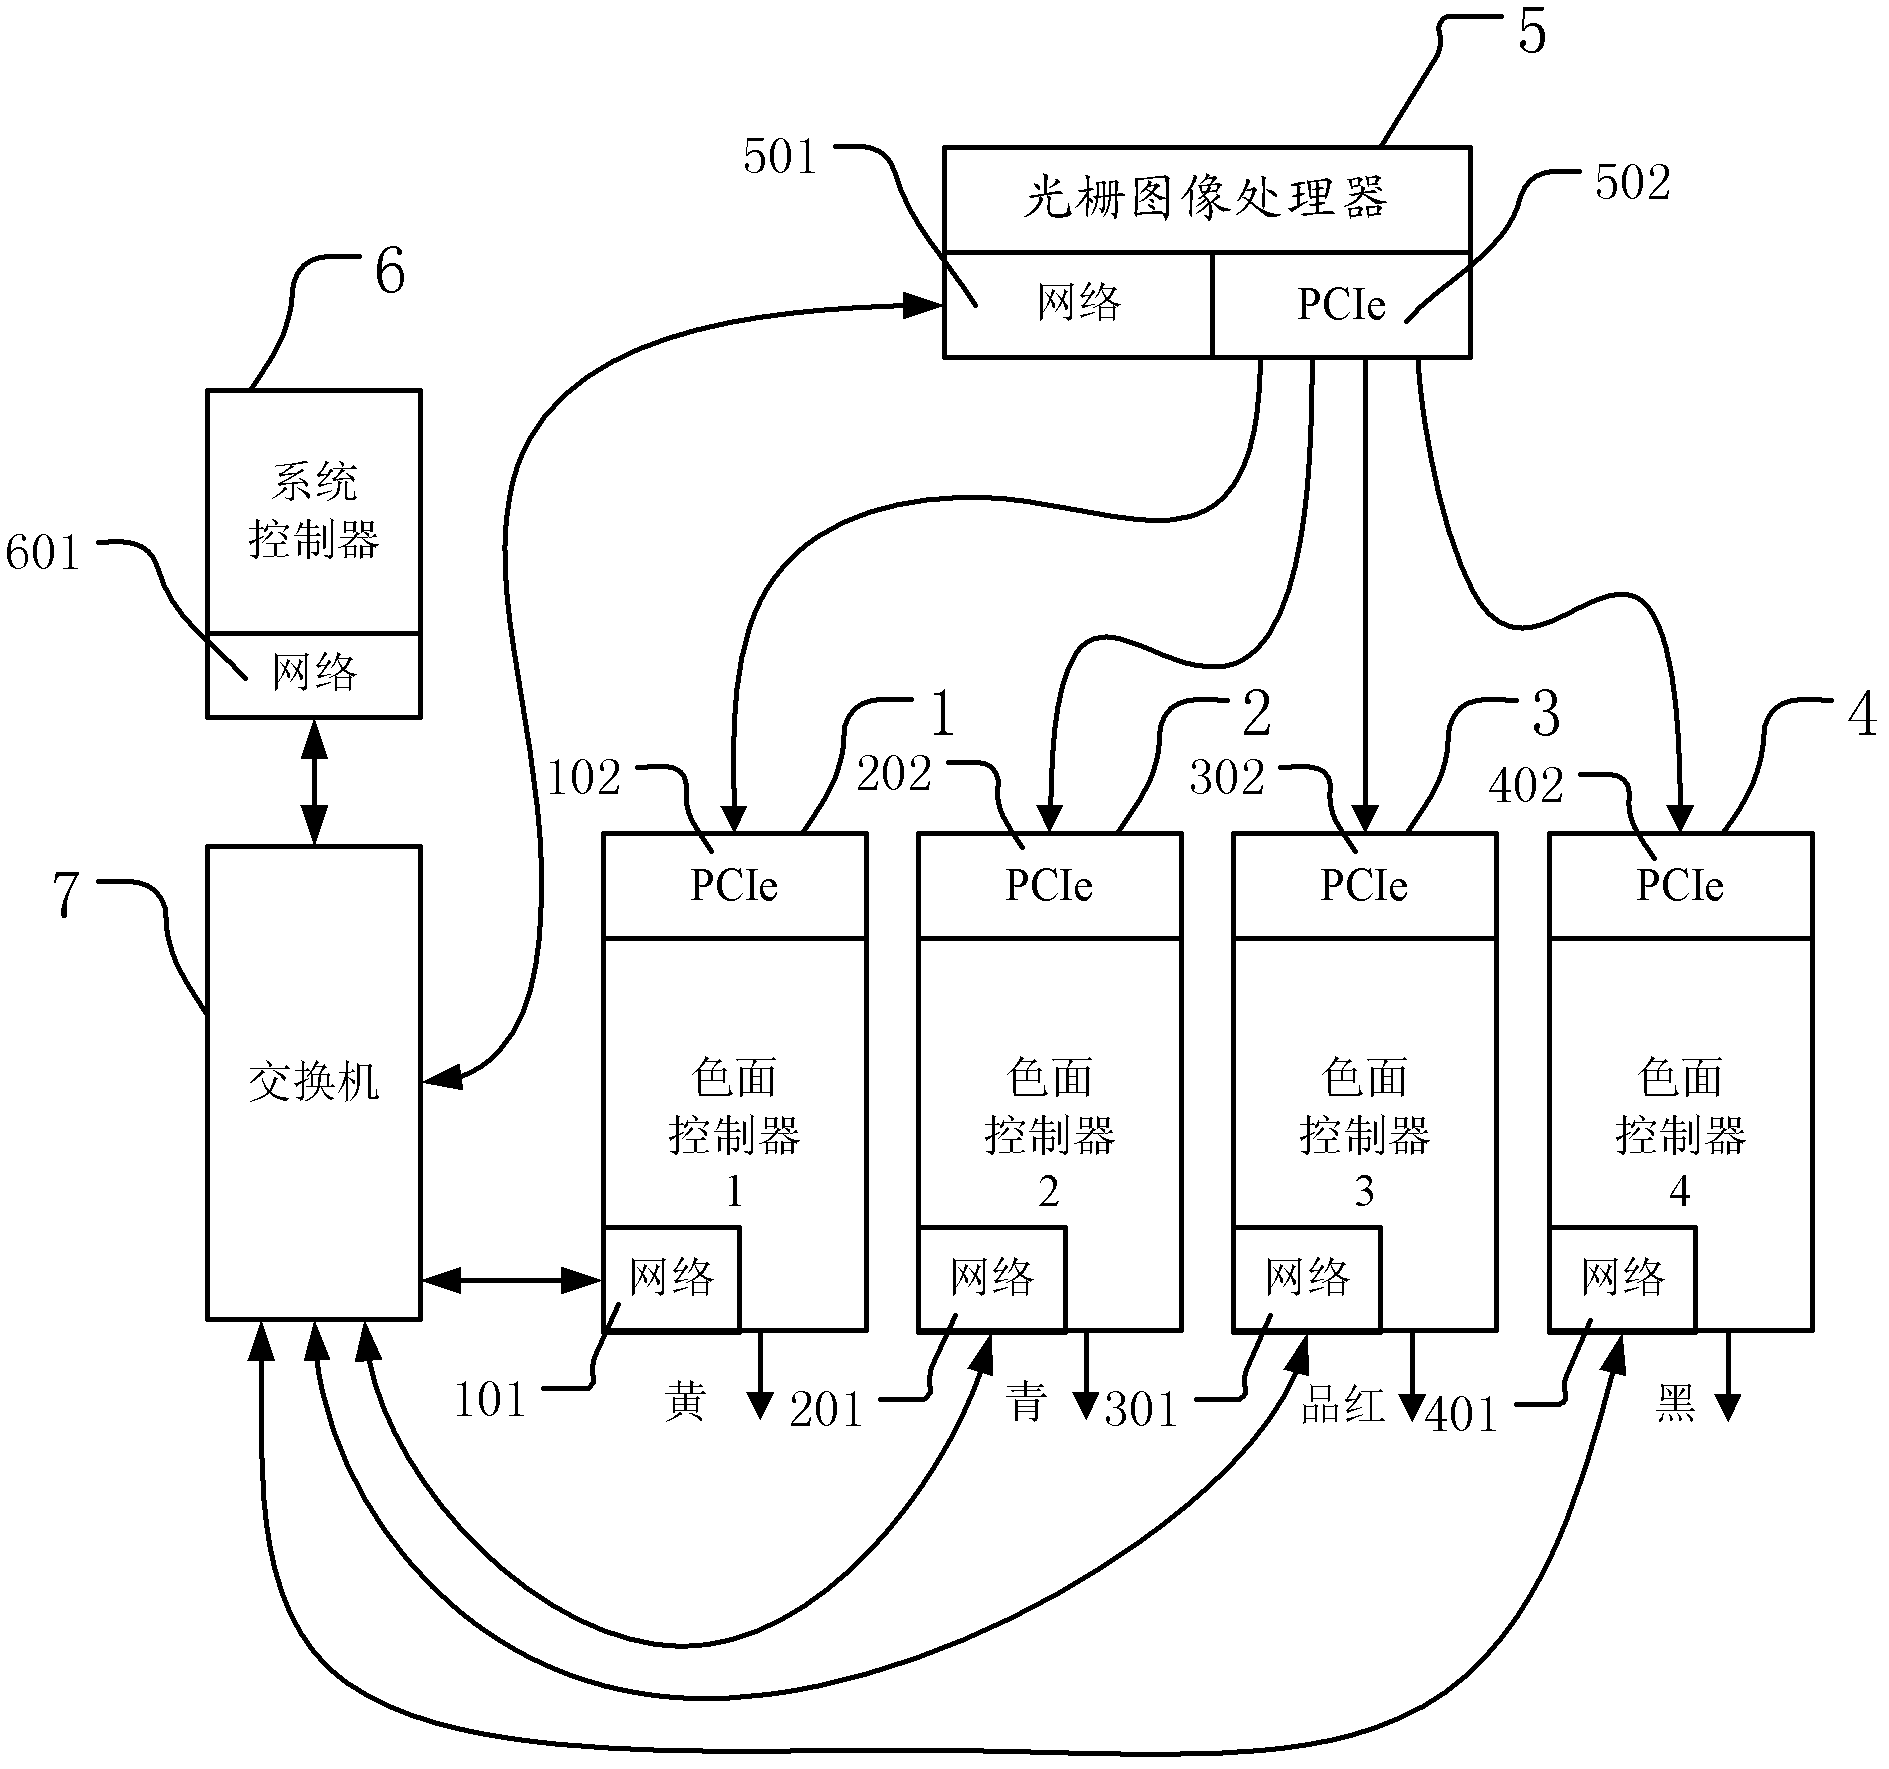 Distributed ink jetting digital printing method and system of supporting variable data